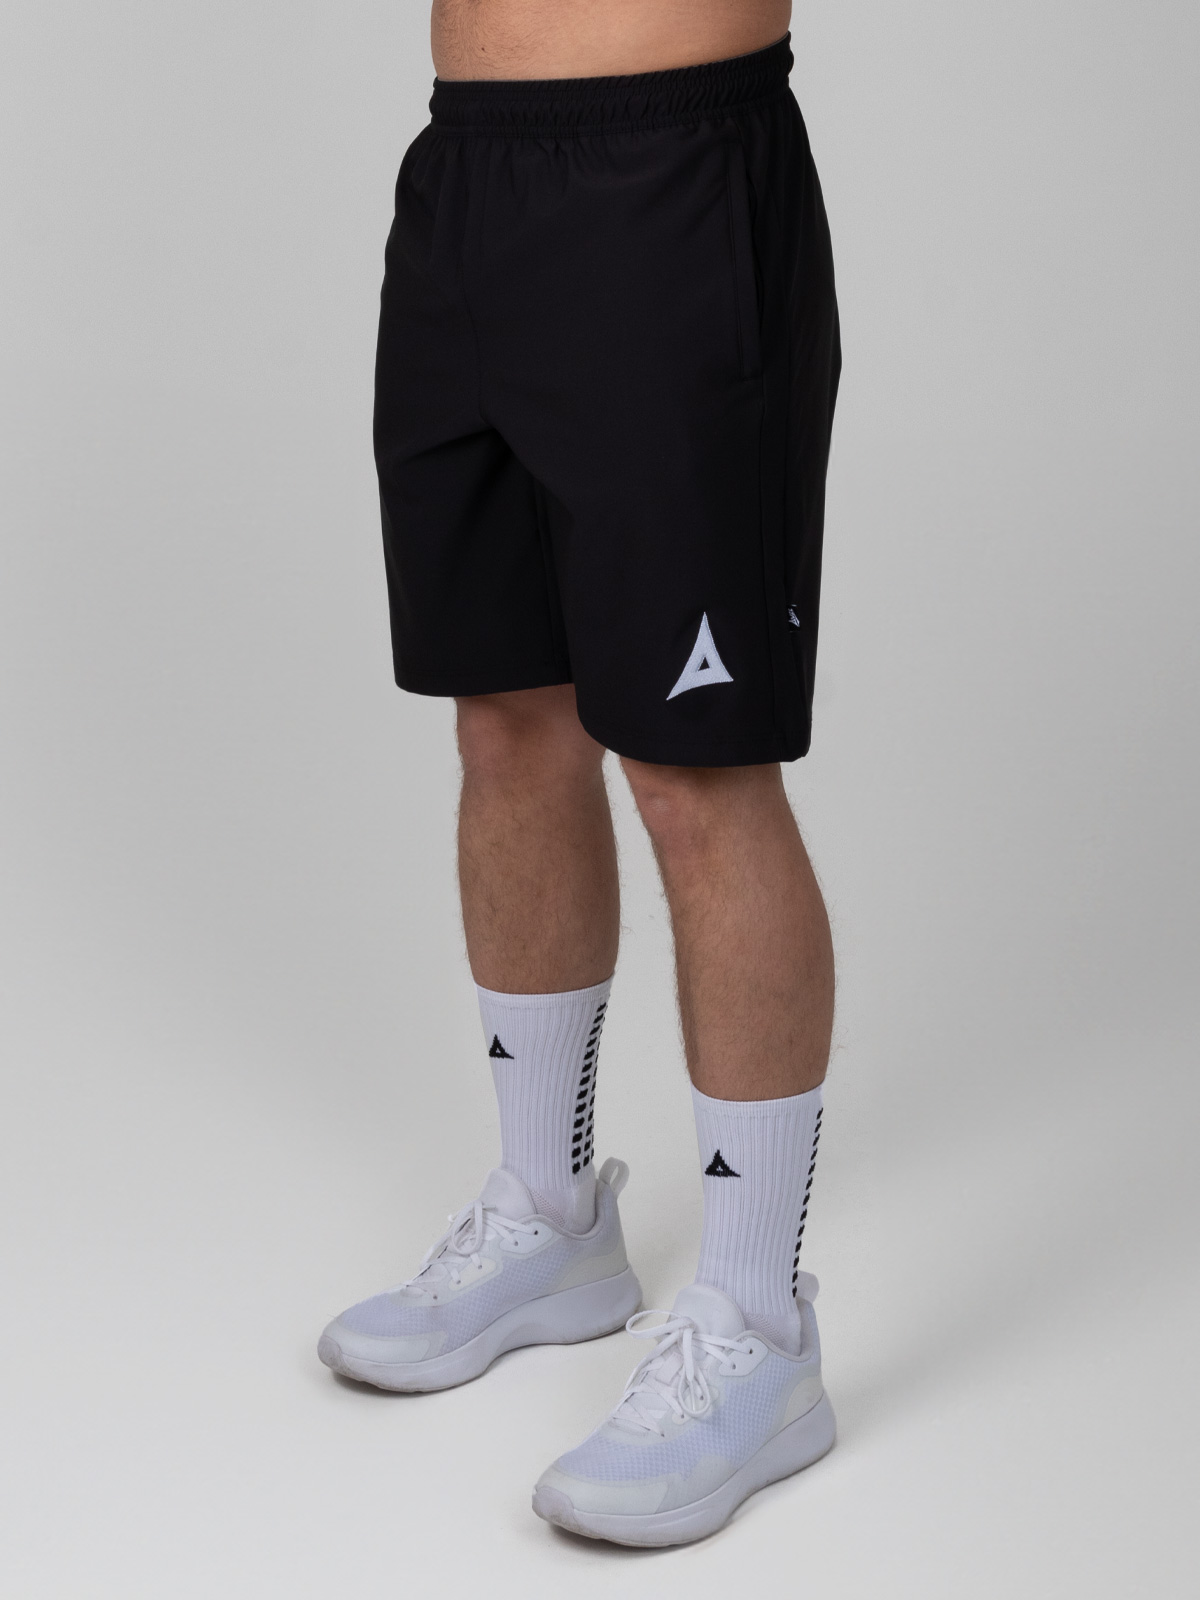 black woven shorts for training